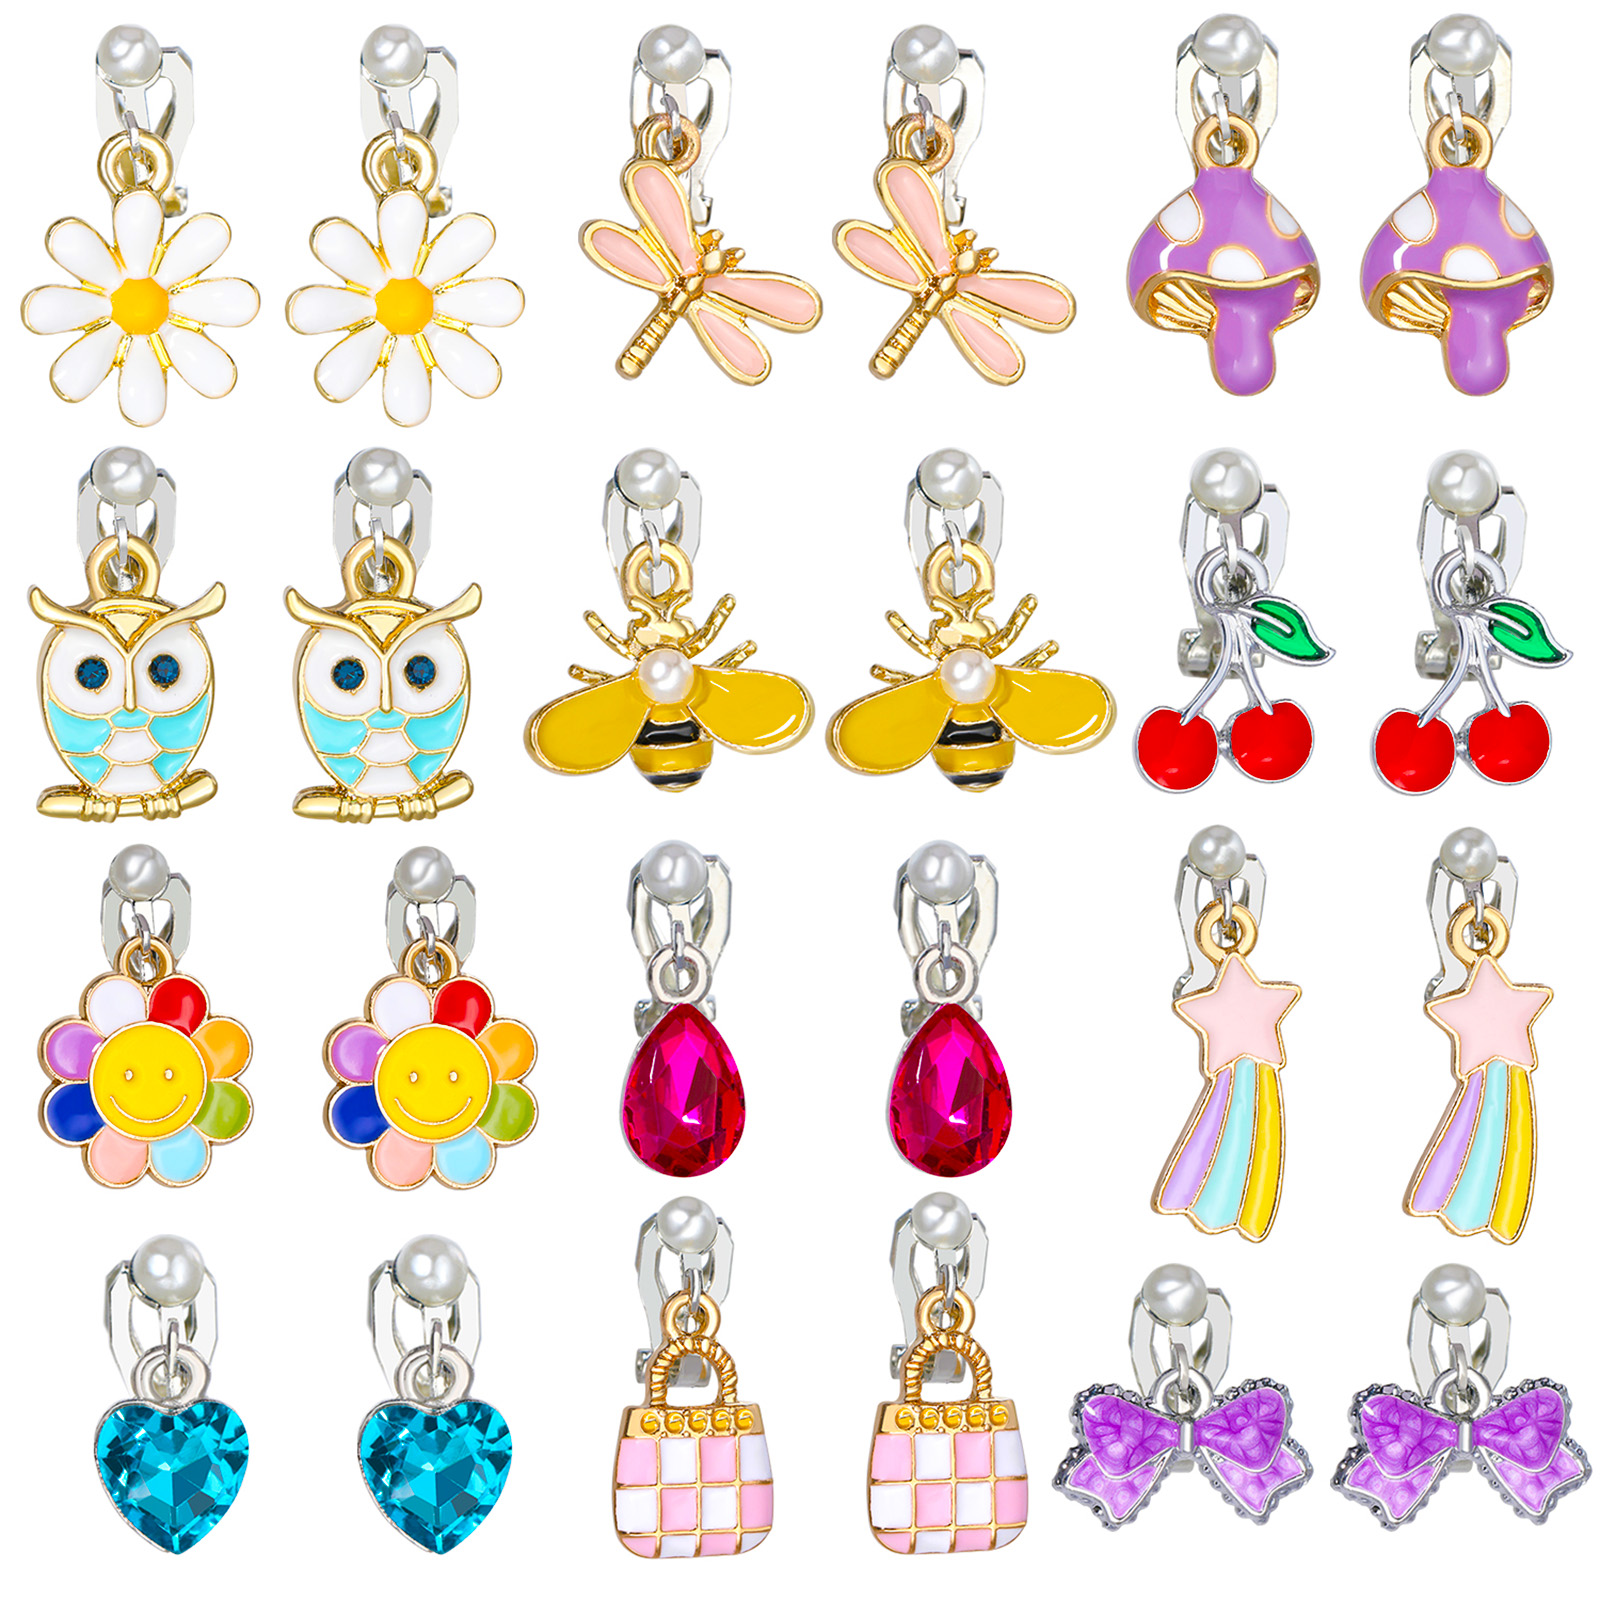 PinkSheep 12 Pairs Clip On Earrings for Girls, Kids Unicorn Flower Star Dangle Earrings Set Jewelries for Child - image 1 of 8